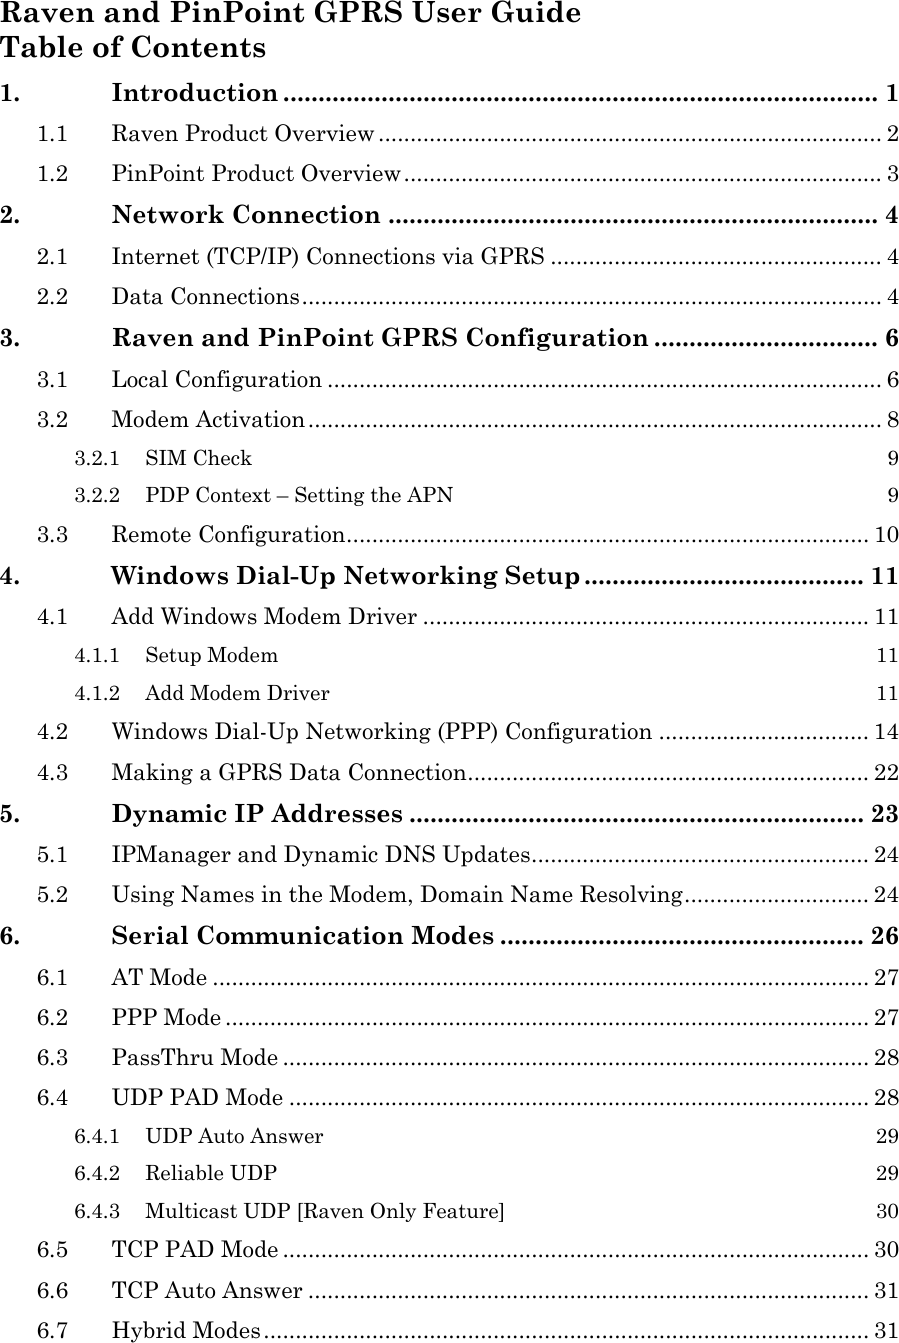 Raven and PinPoint GPRS User Guide Table of Contents 1. Introduction ..................................................................................... 1 1.1 Raven Product Overview ............................................................................... 2 1.2 PinPoint Product Overview........................................................................... 3 2. Network Connection ...................................................................... 4 2.1 Internet (TCP/IP) Connections via GPRS .................................................... 4 2.2 Data Connections........................................................................................... 4 3. Raven and PinPoint GPRS Configuration ................................ 6 3.1 Local Configuration ....................................................................................... 6 3.2 Modem Activation.......................................................................................... 8 3.2.1 SIM Check 9 3.2.2 PDP Context – Setting the APN 9 3.3 Remote Configuration.................................................................................. 10 4. Windows Dial-Up Networking Setup ........................................ 11 4.1 Add Windows Modem Driver ...................................................................... 11 4.1.1 Setup Modem 11 4.1.2 Add Modem Driver 11 4.2 Windows Dial-Up Networking (PPP) Configuration ................................. 14 4.3 Making a GPRS Data Connection............................................................... 22 5. Dynamic IP Addresses ................................................................. 23 5.1 IPManager and Dynamic DNS Updates..................................................... 24 5.2 Using Names in the Modem, Domain Name Resolving............................. 24 6. Serial Communication Modes .................................................... 26 6.1 AT Mode ....................................................................................................... 27 6.2 PPP Mode ..................................................................................................... 27 6.3 PassThru Mode ............................................................................................ 28 6.4 UDP PAD Mode ........................................................................................... 28 6.4.1 UDP Auto Answer 29 6.4.2 Reliable UDP 29 6.4.3 Multicast UDP [Raven Only Feature] 30 6.5 TCP PAD Mode ............................................................................................ 30 6.6 TCP Auto Answer ........................................................................................ 31 6.7 Hybrid Modes ............................................................................................... 31  